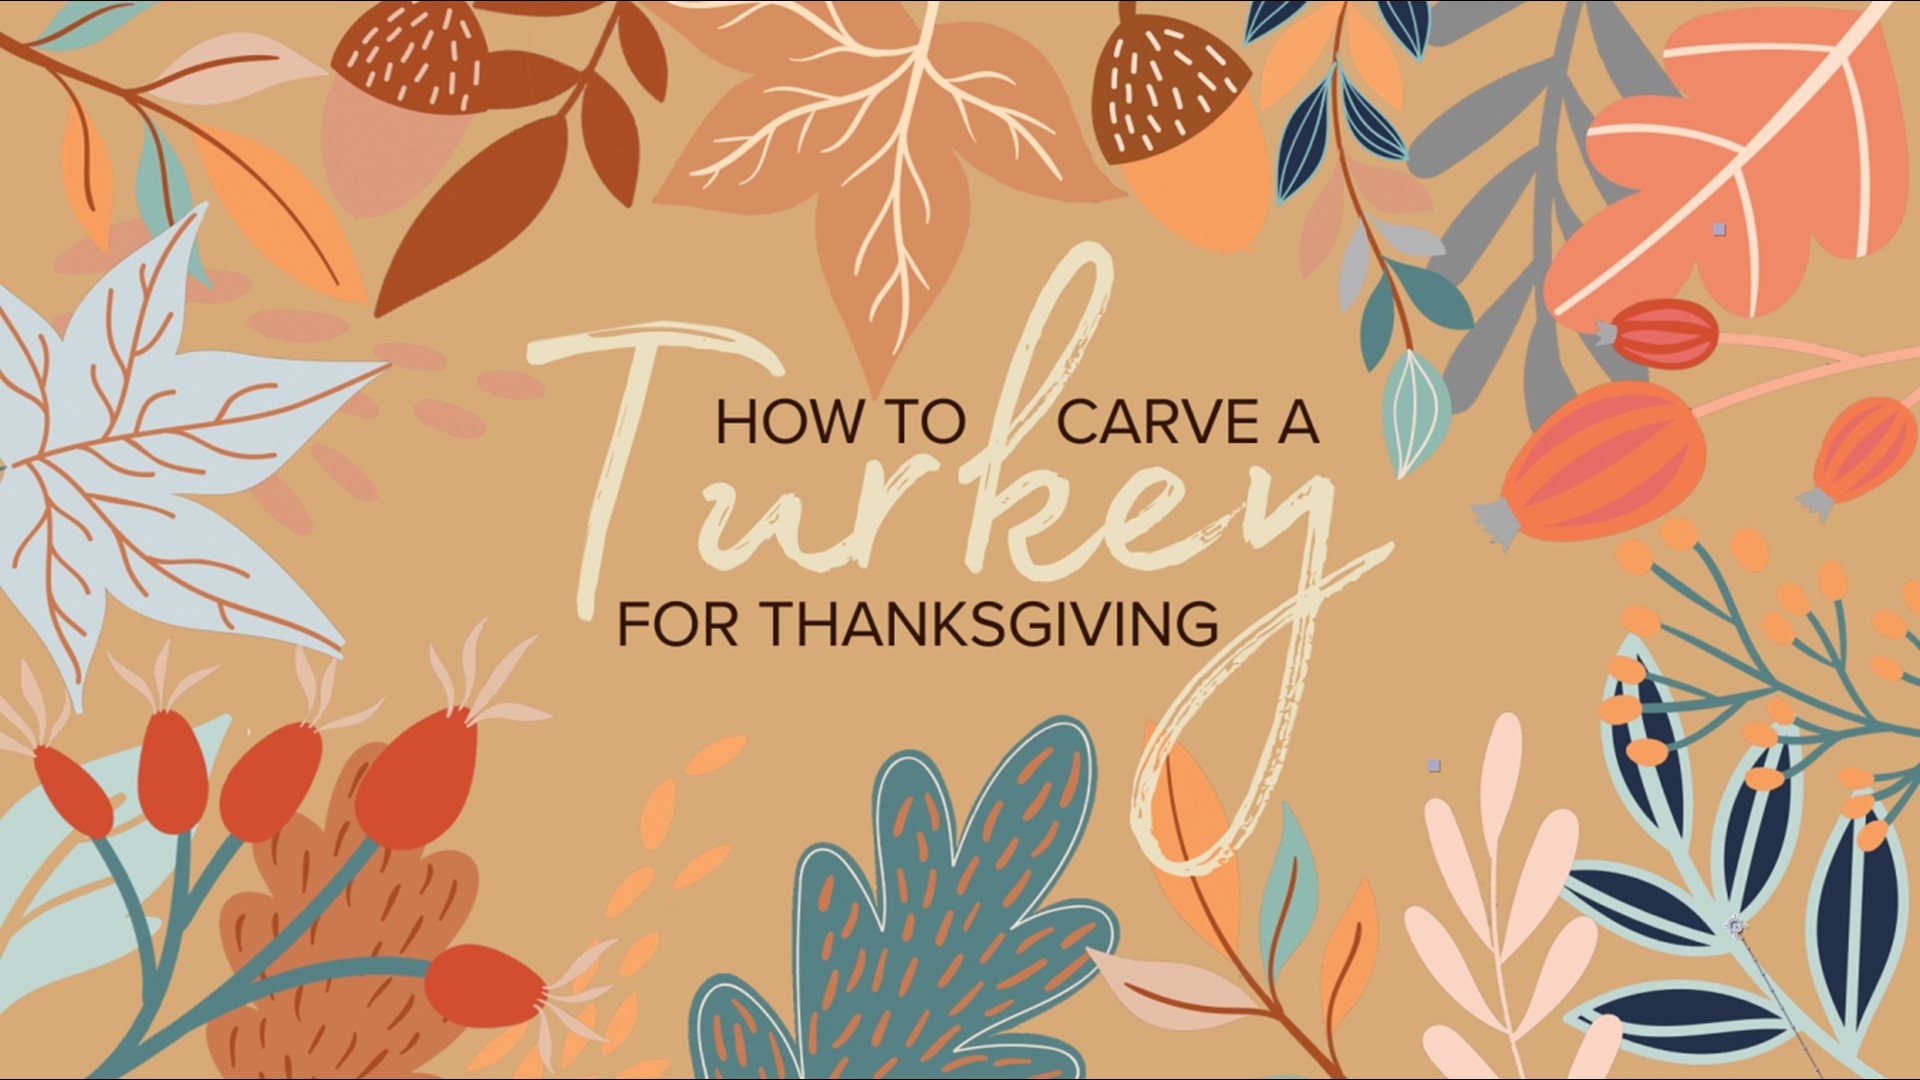 Ahead of Thanksgiving, a local chef is sharing tips and tricks to carving the perfect bird.